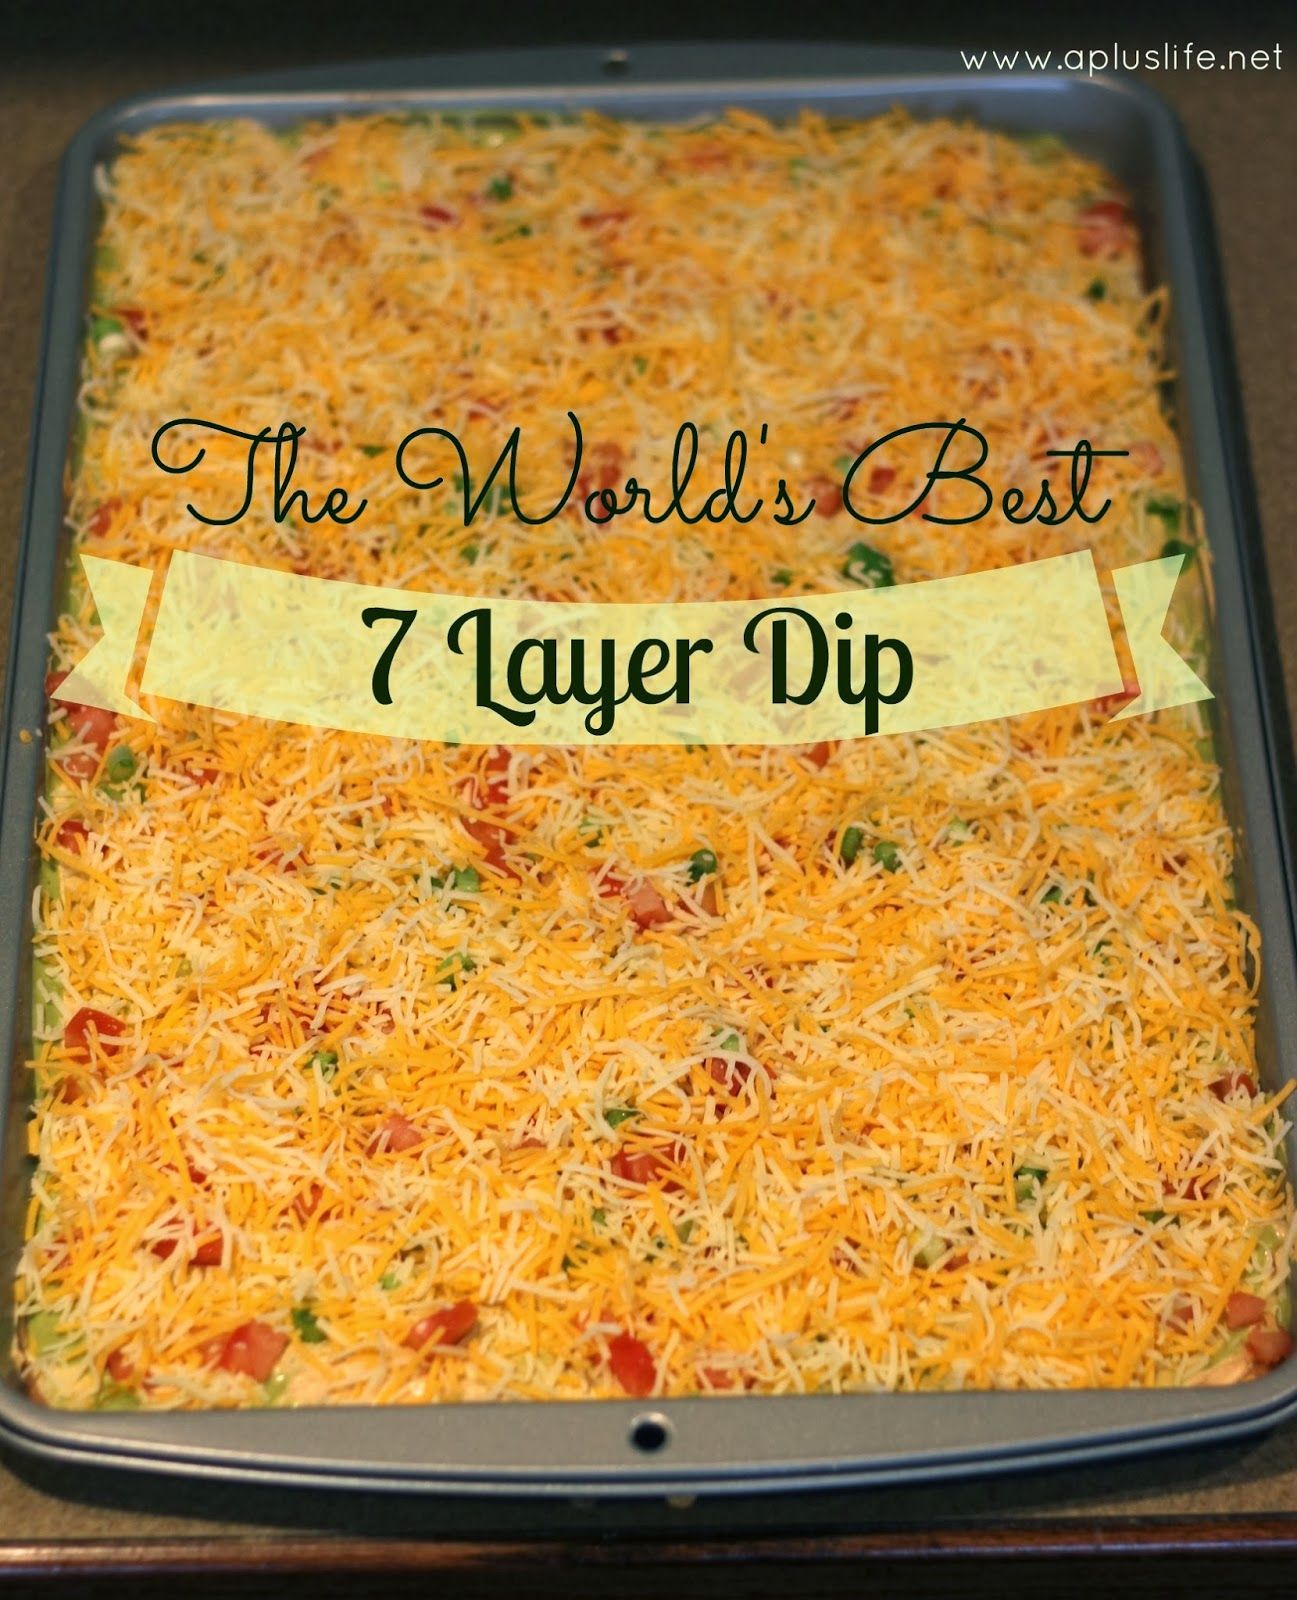 *** Really really good bean dip! I followed this recipe, except for instead of using tomatoes and green onions, I used a layer of